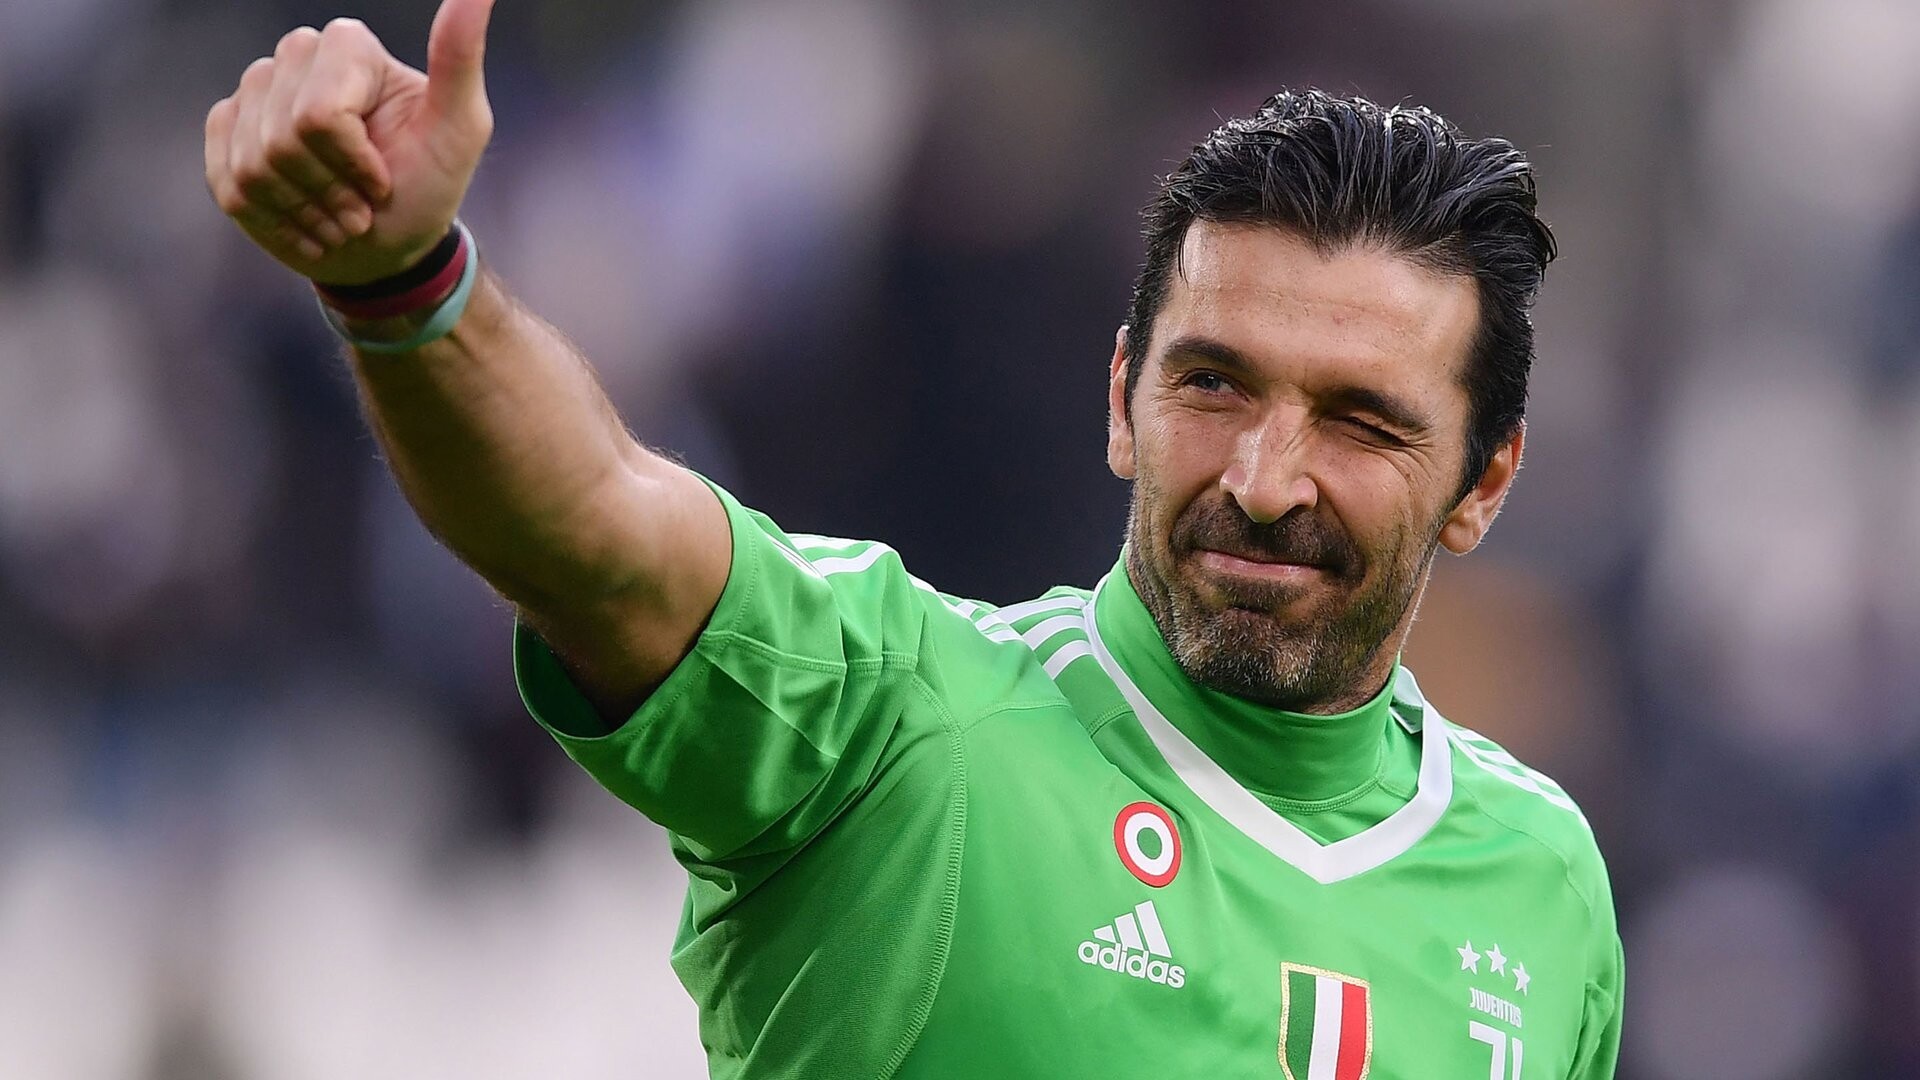 Gianluigi Buffon: The third-most expensive goalkeeper of all time, One of the best goalkeepers of all time. 1920x1080 Full HD Wallpaper.